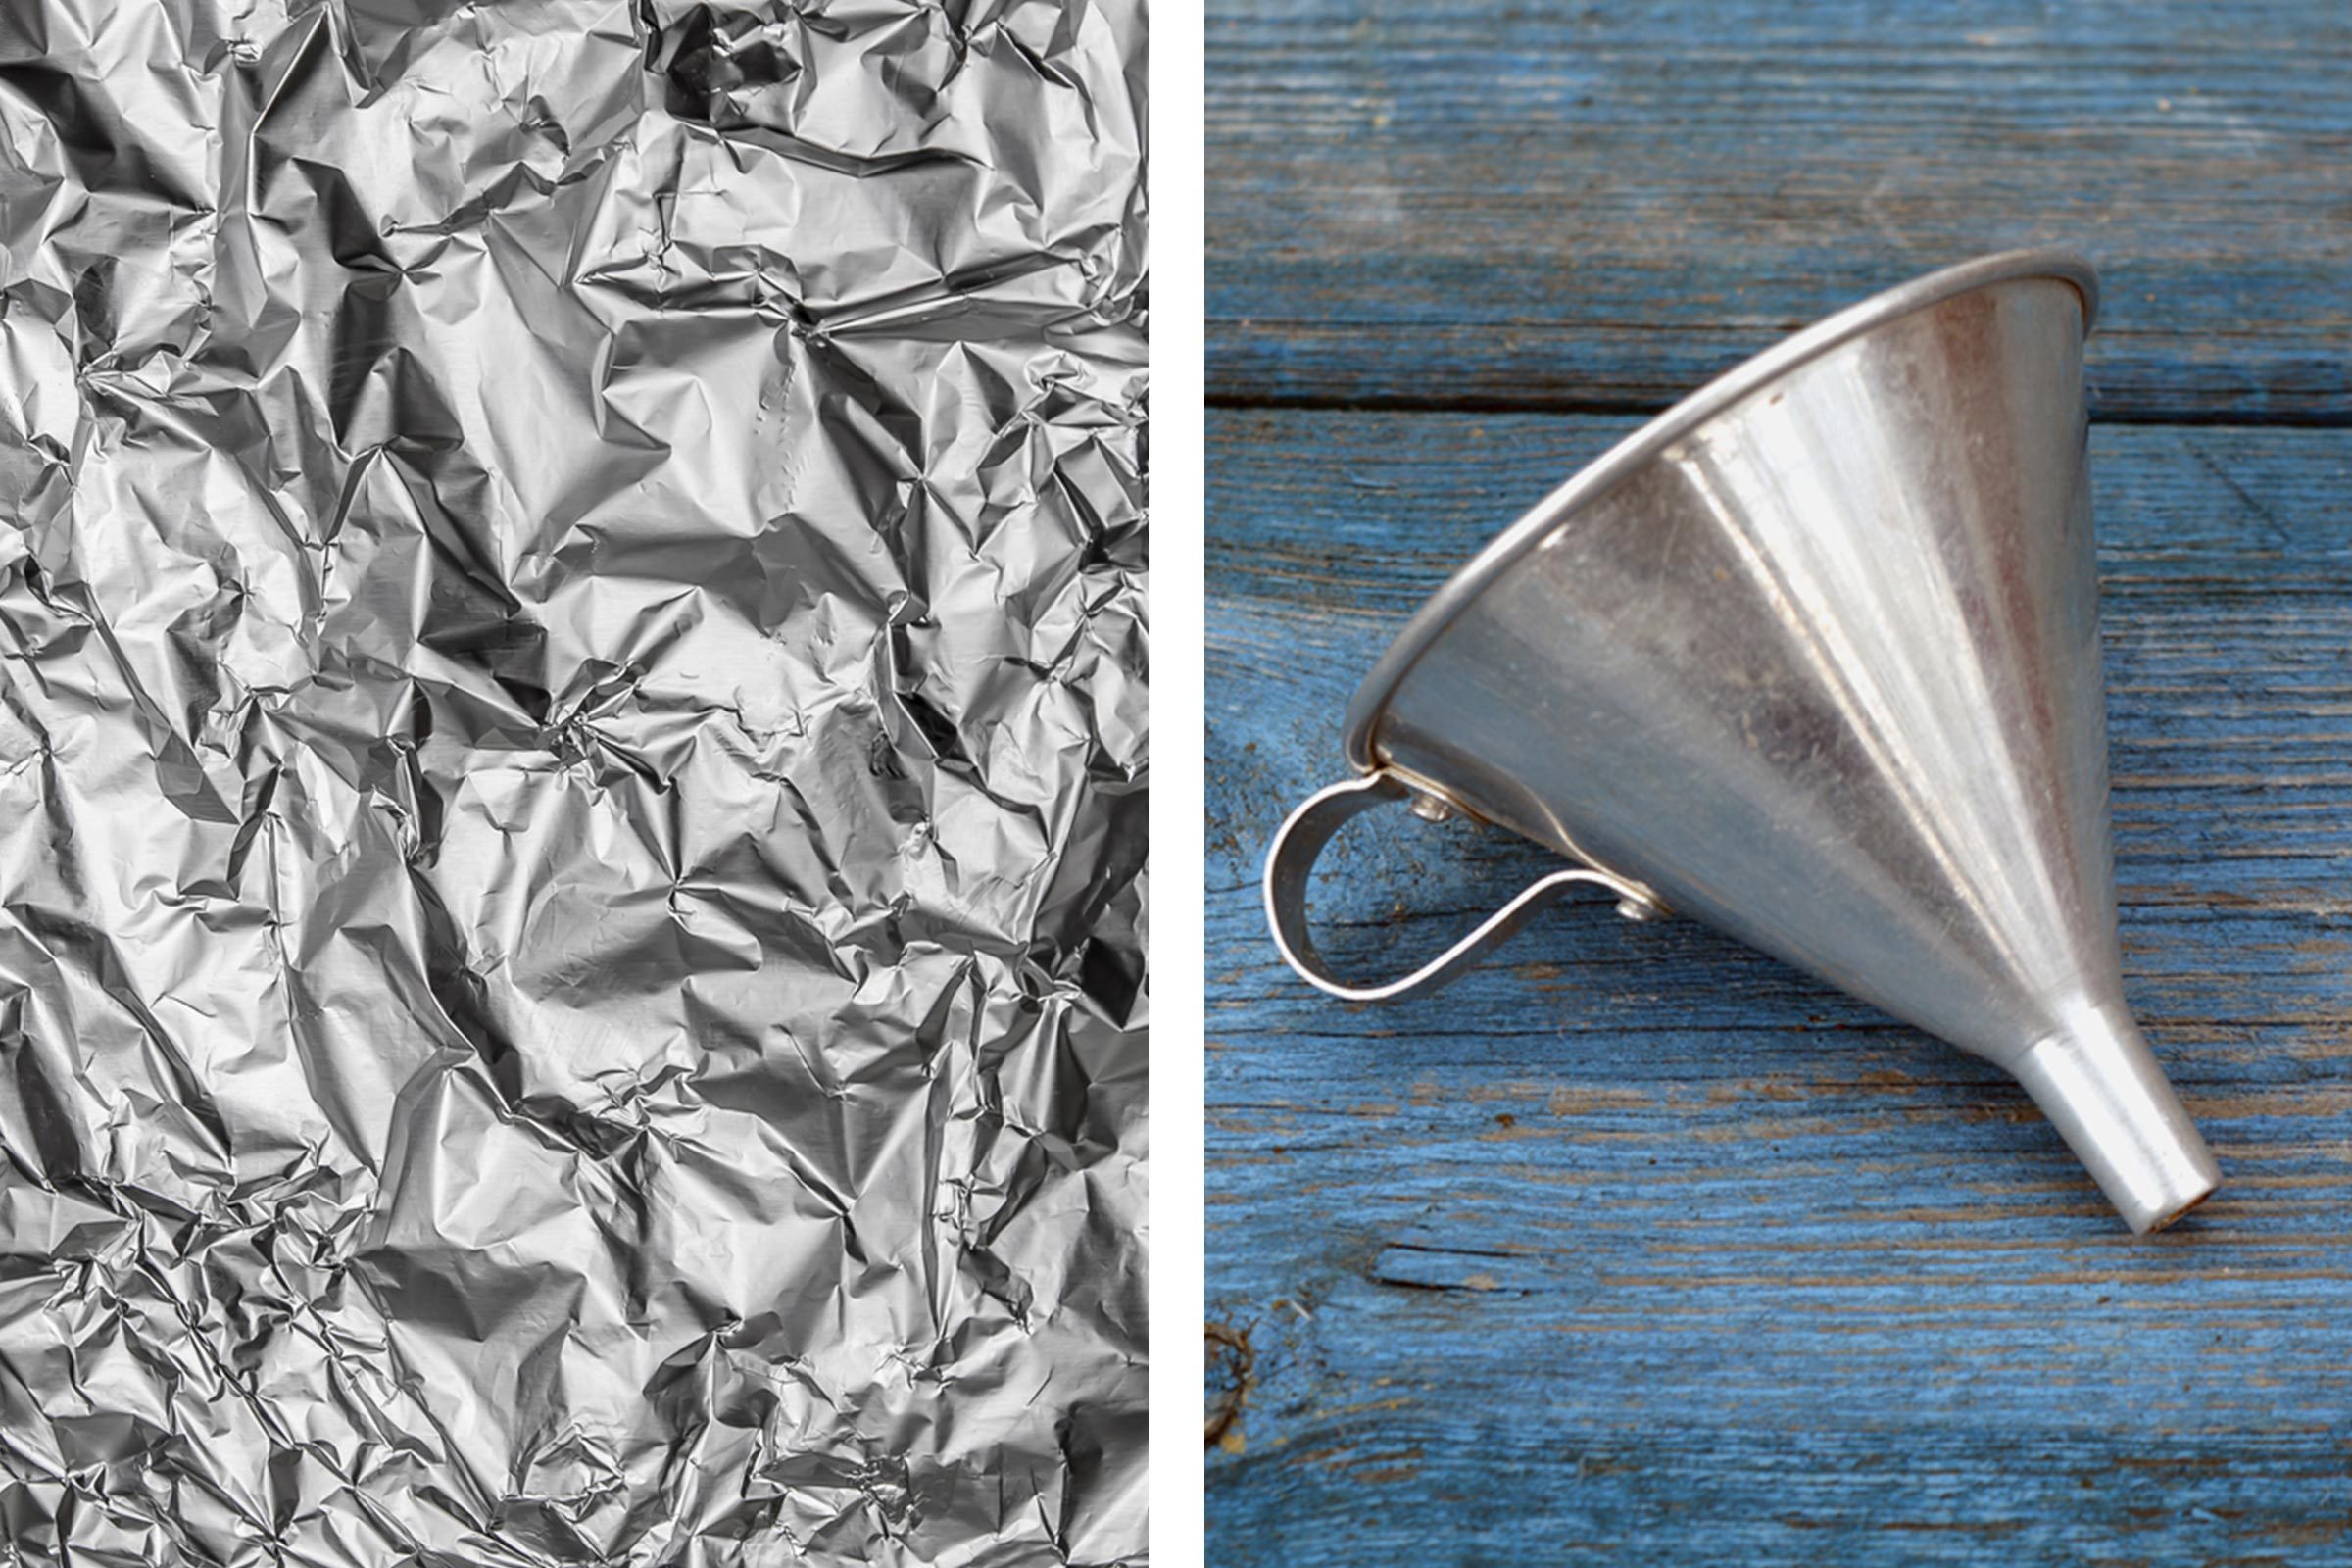 How to Make a Tin Foil Hat: 3 Fun & Easy Ways